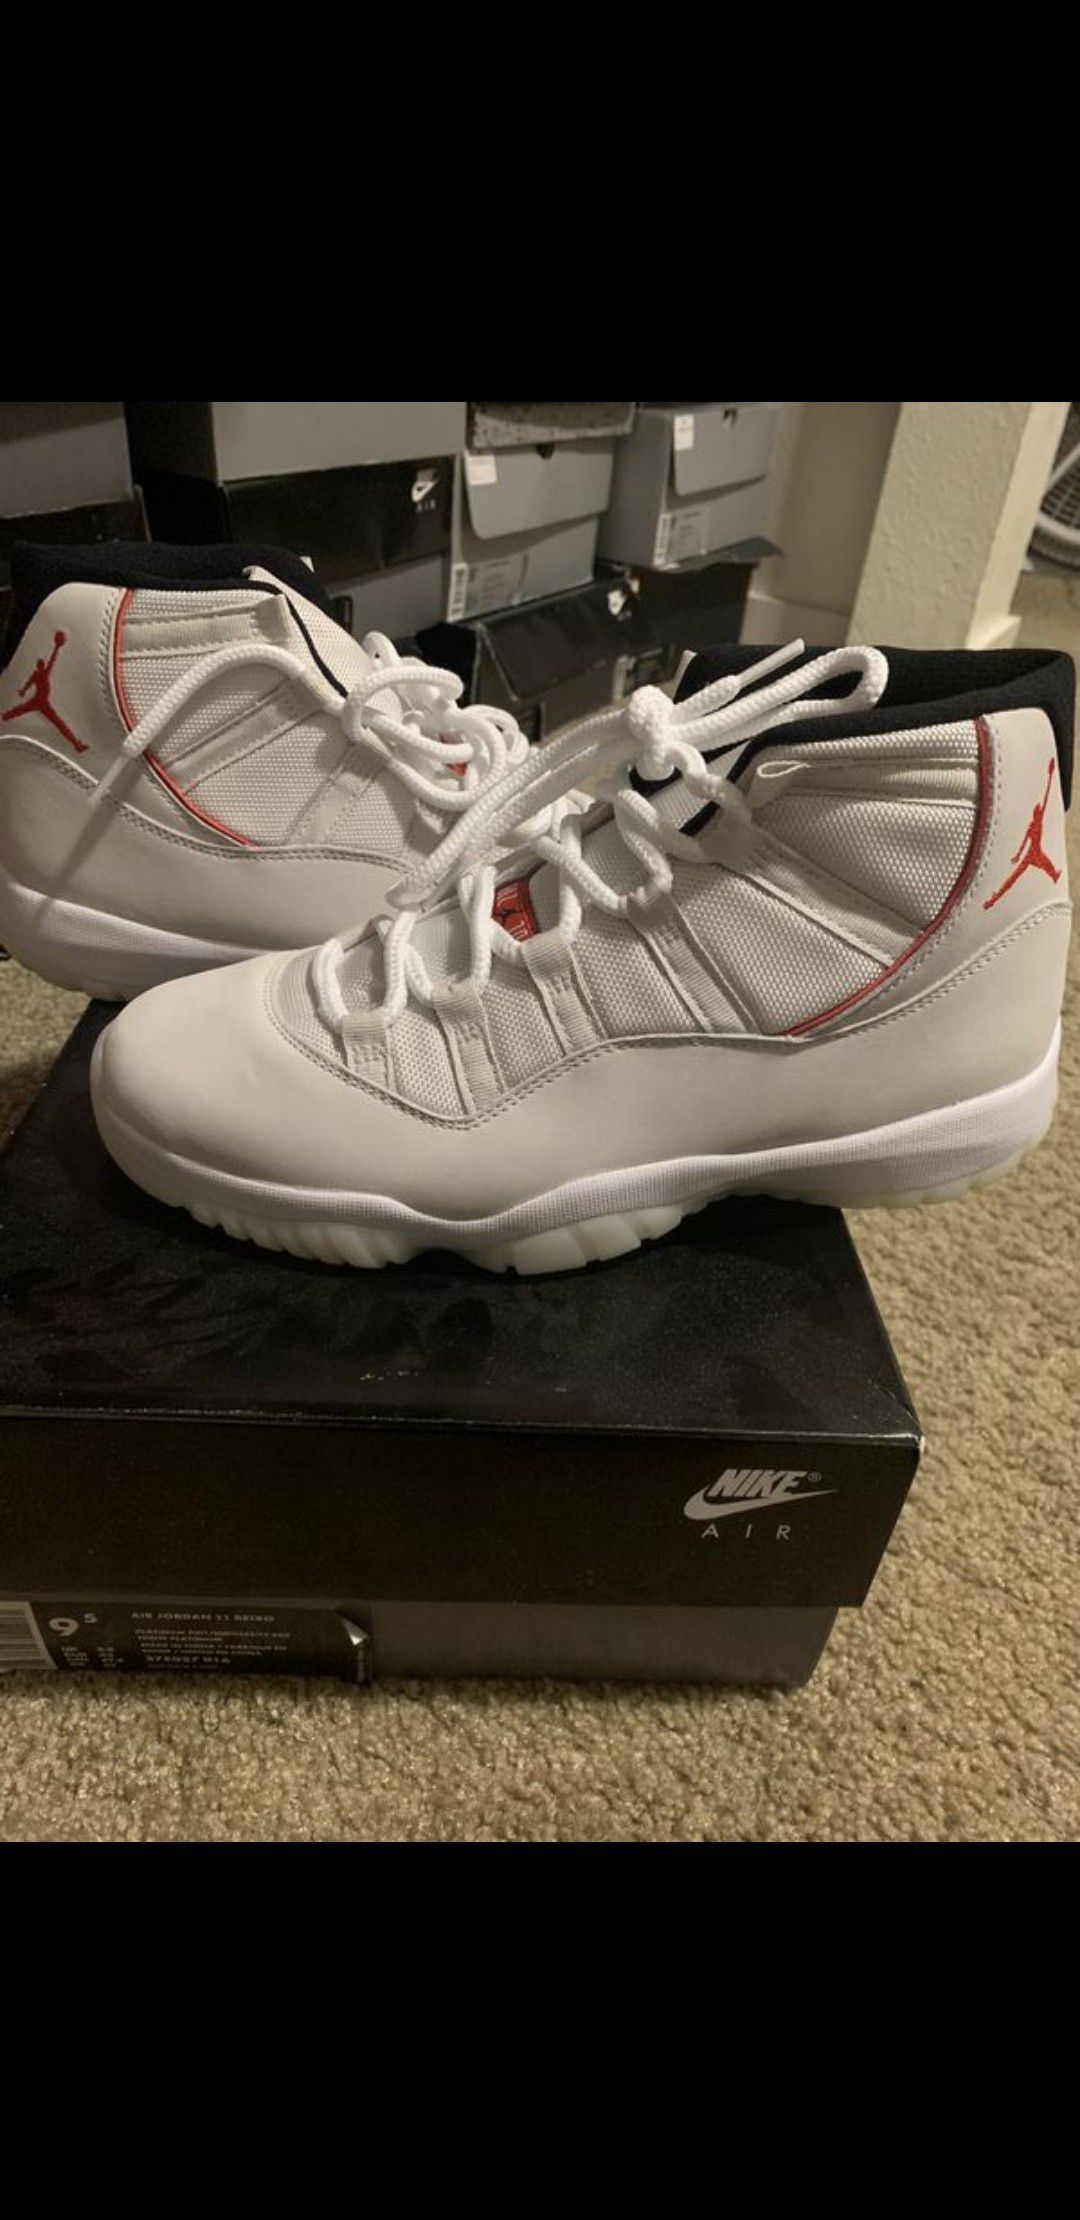 Size 9.5 DS brand new platinum tint 11s OG all serious buyers only please and thanks